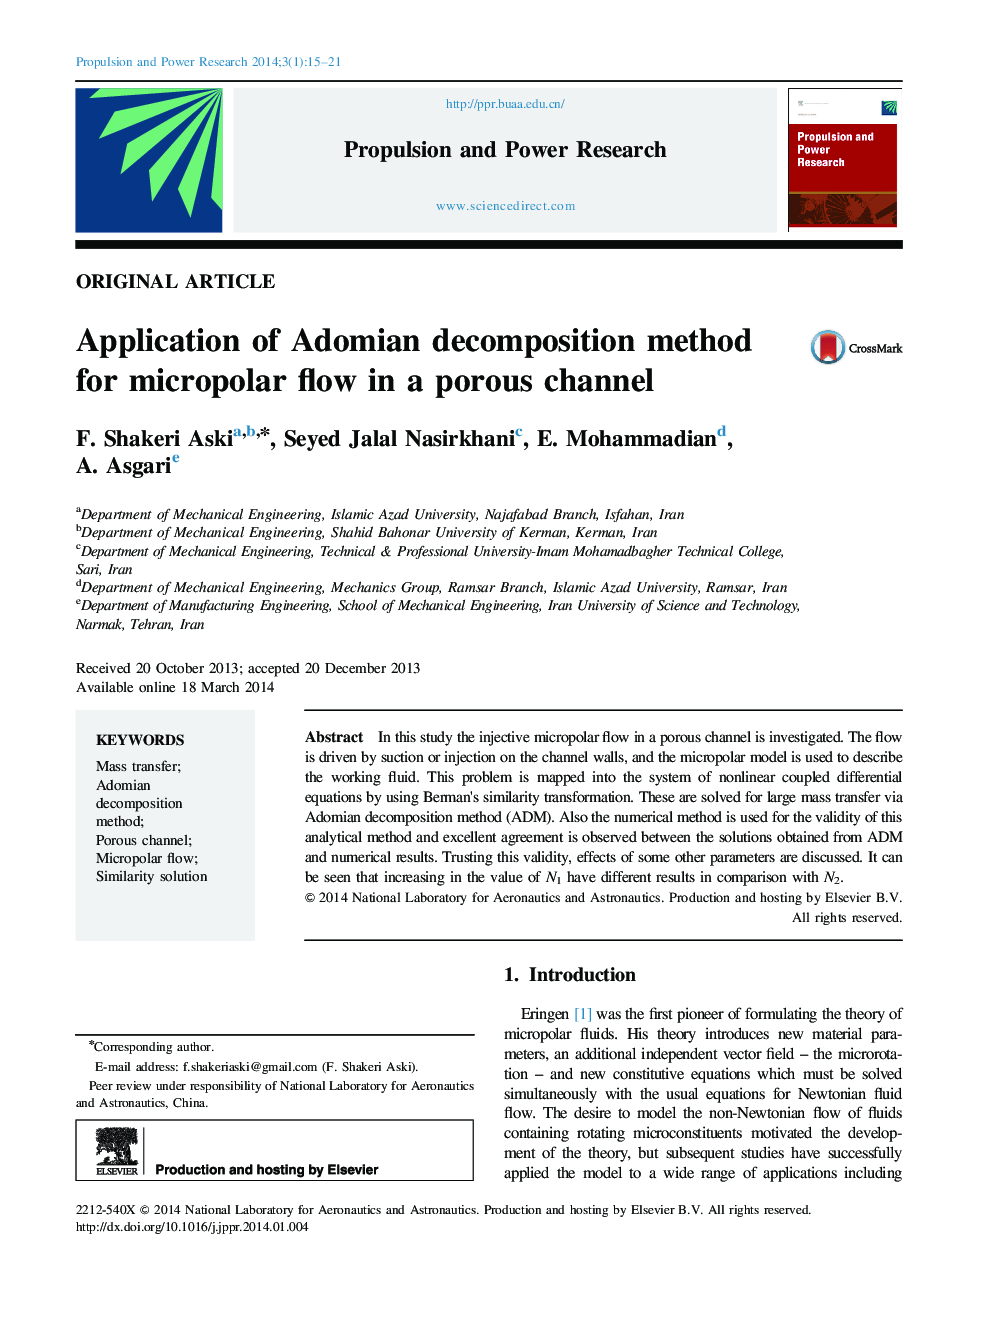 Application of Adomian decomposition method for micropolar flow in a porous channel 